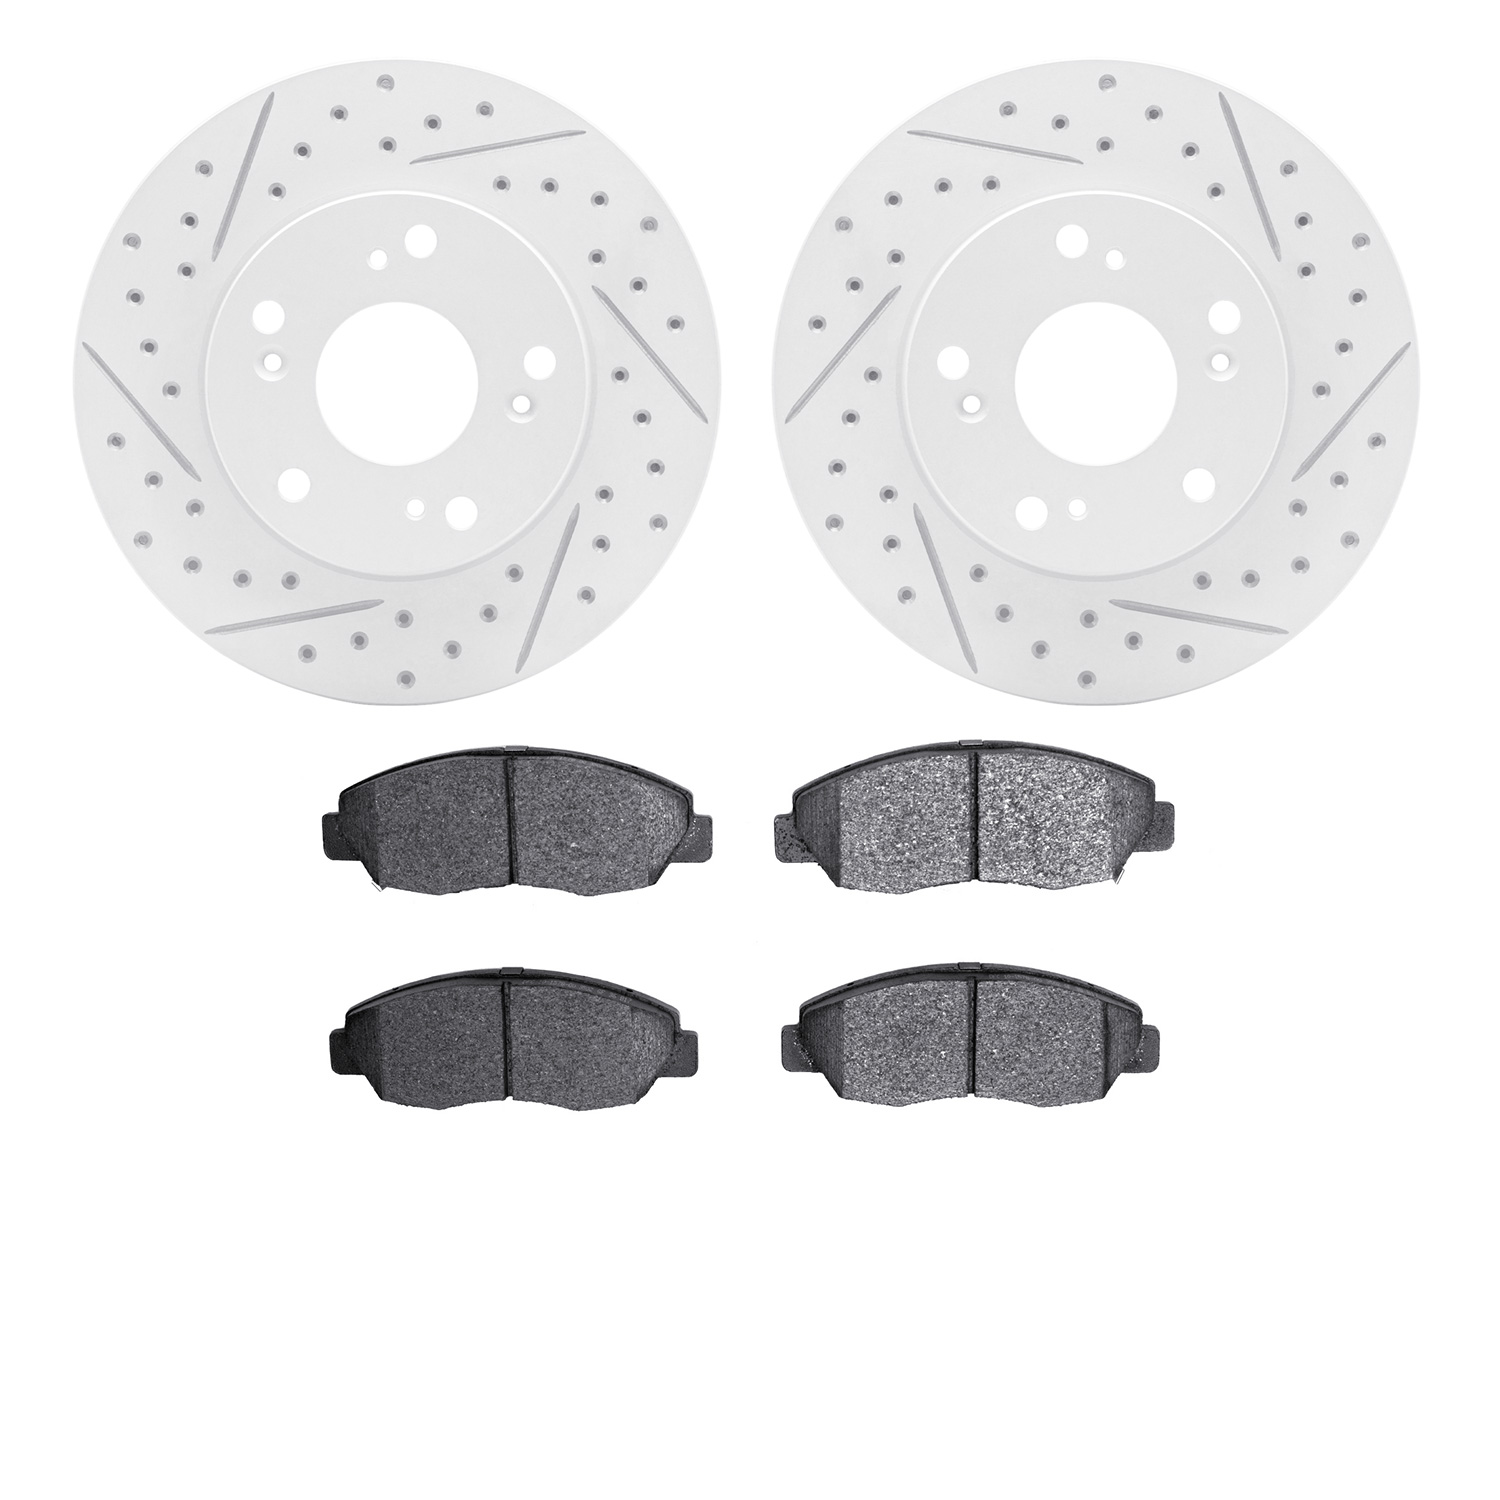 2502-59029 Geoperformance Drilled/Slotted Rotors w/5000 Advanced Brake Pads Kit, 2006-2011 Acura/Honda, Position: Front